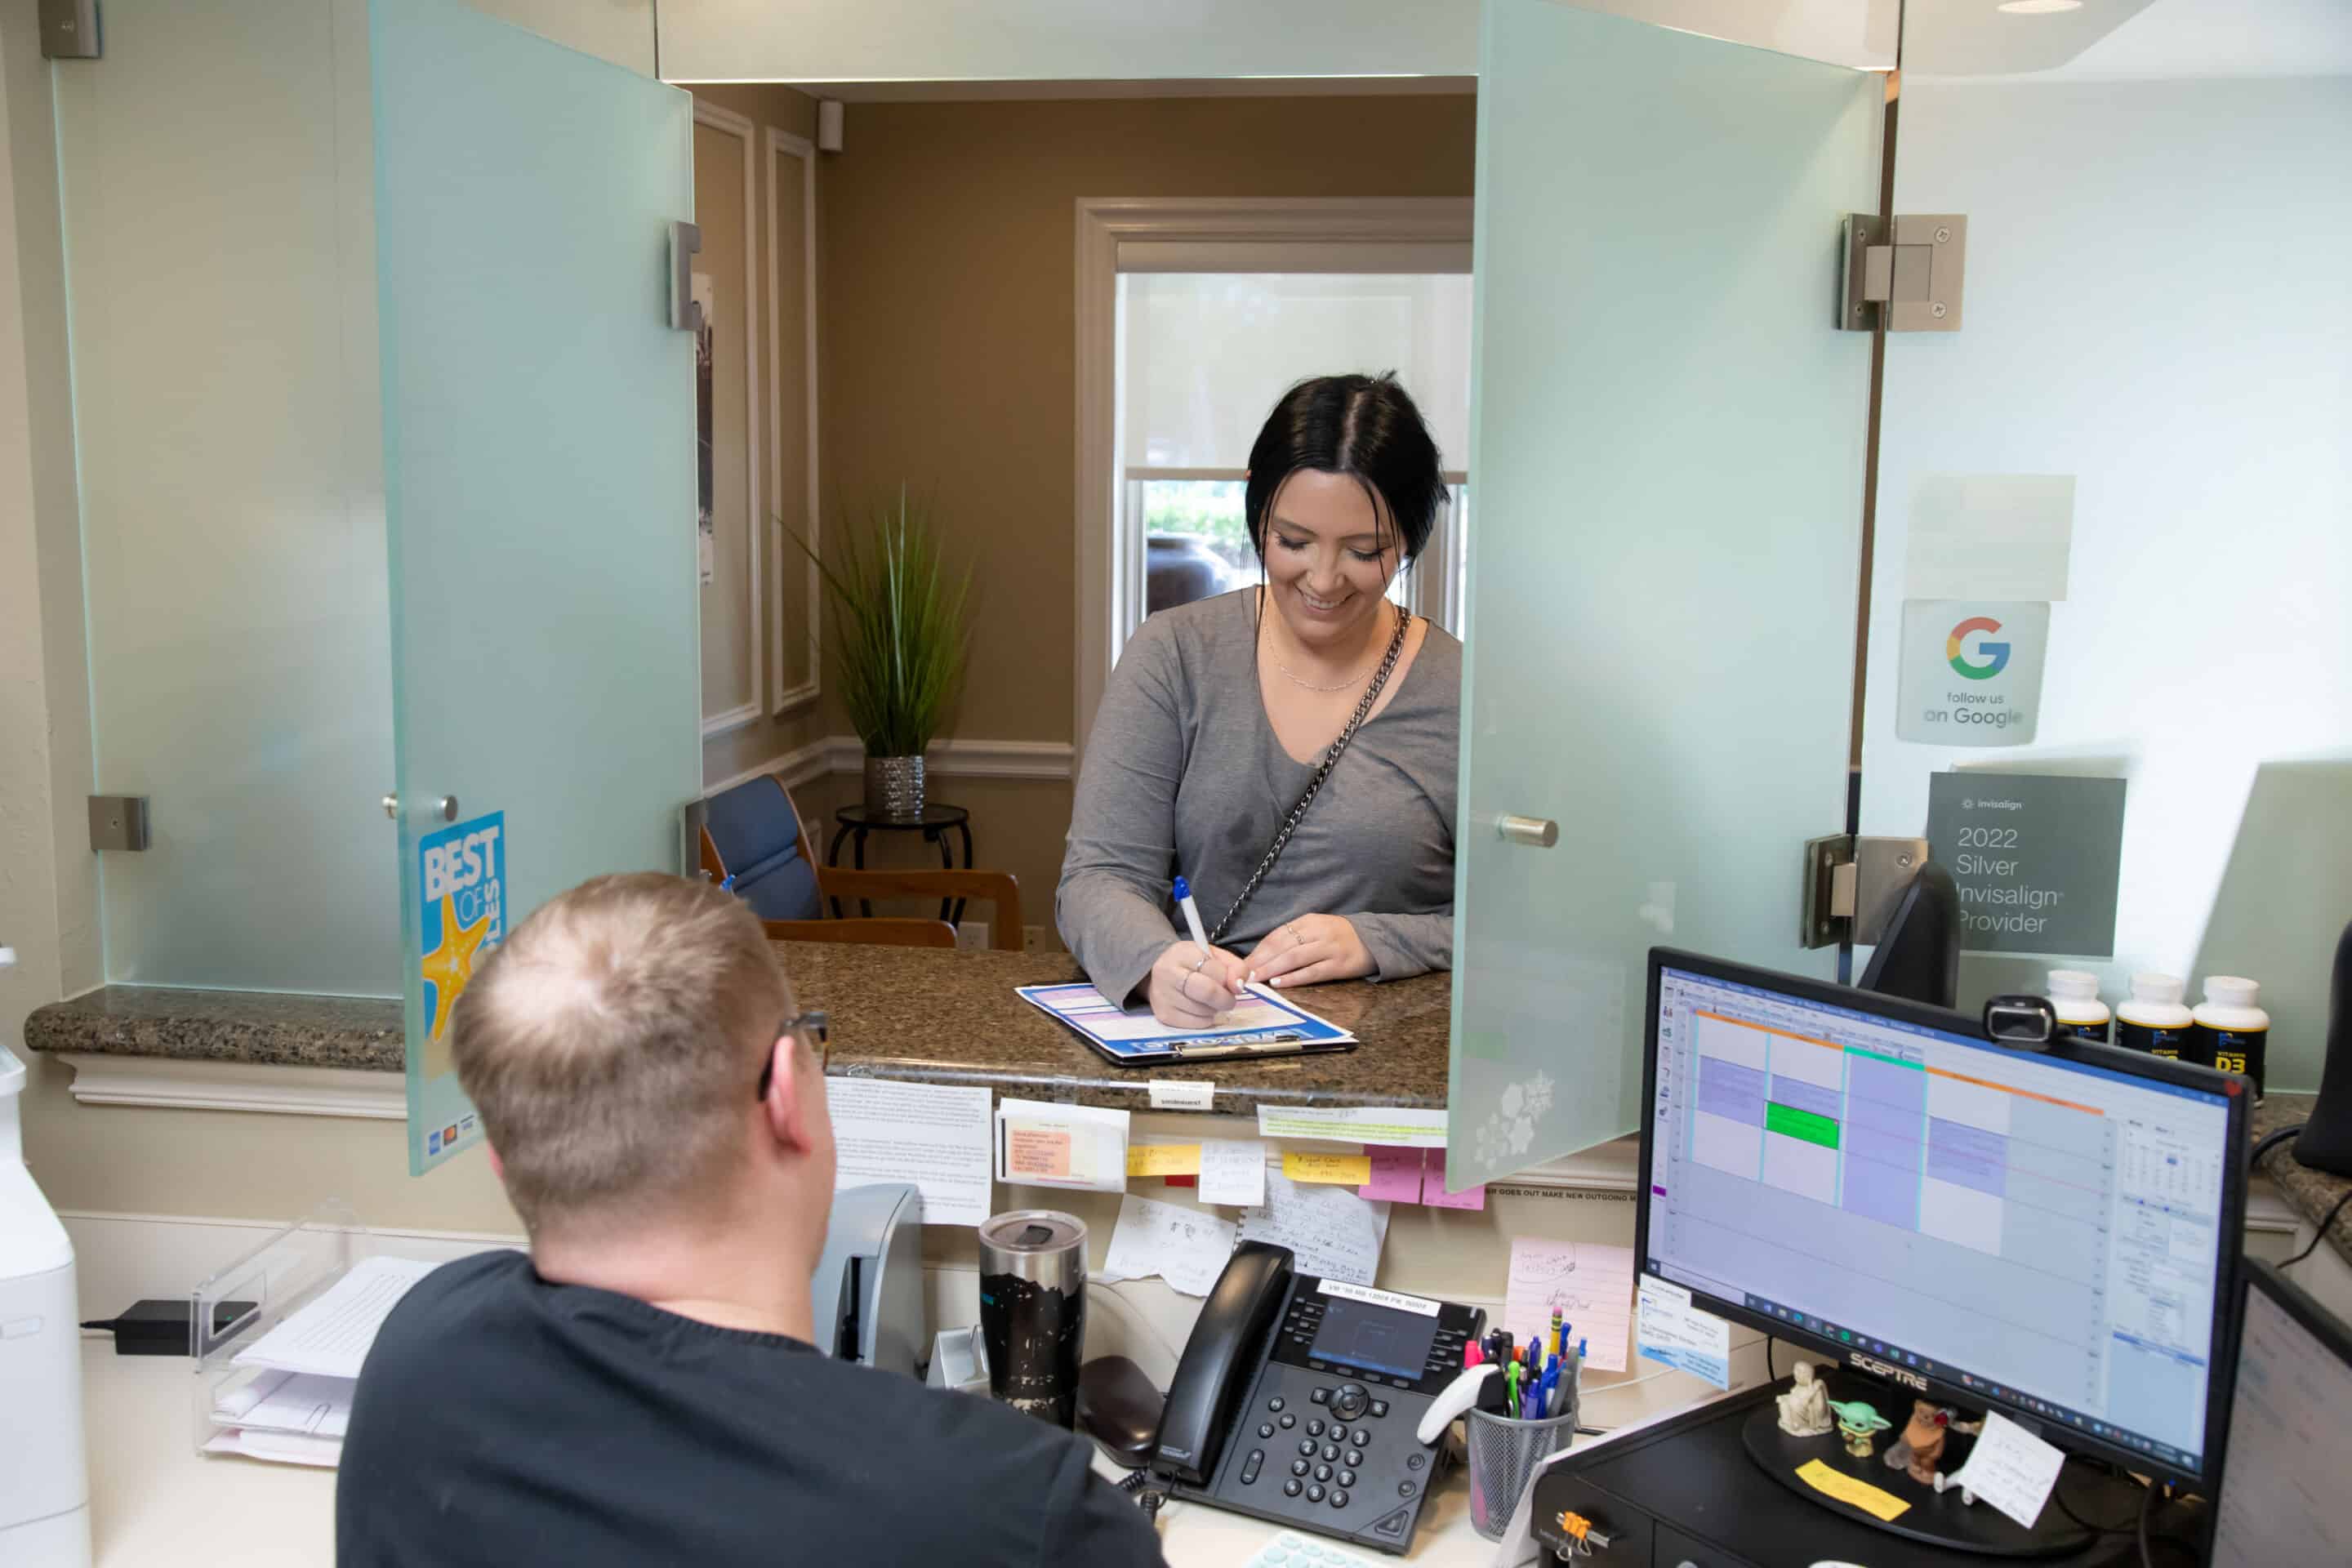 A patient fills out a form at the front desk of Smilecreator's Naples location while smiling.